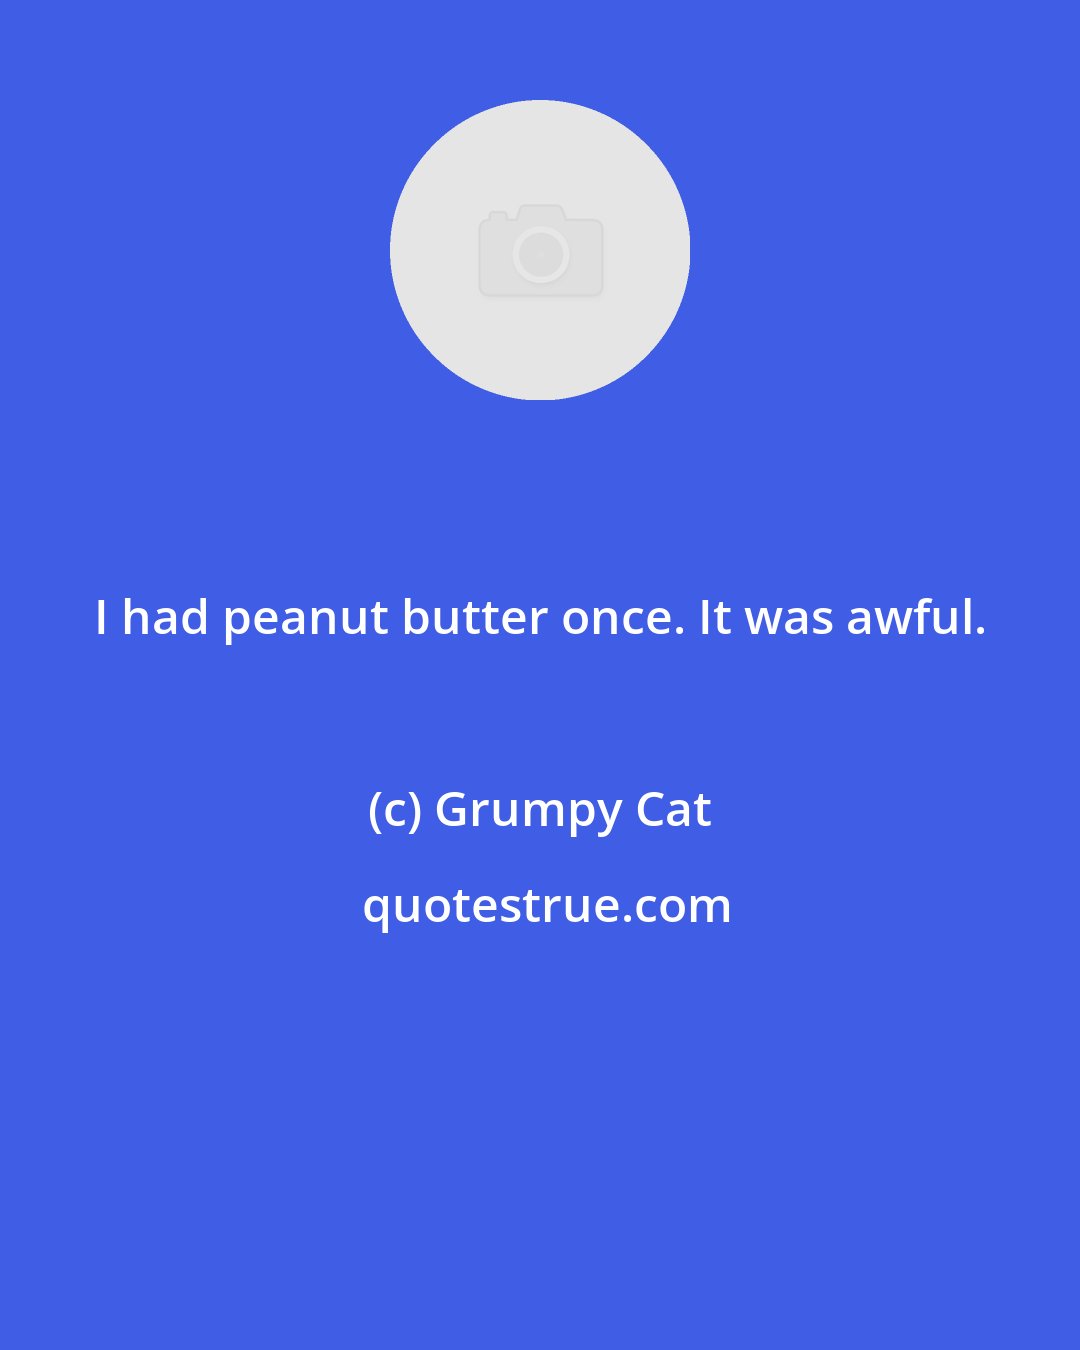 Grumpy Cat: I had peanut butter once. It was awful.